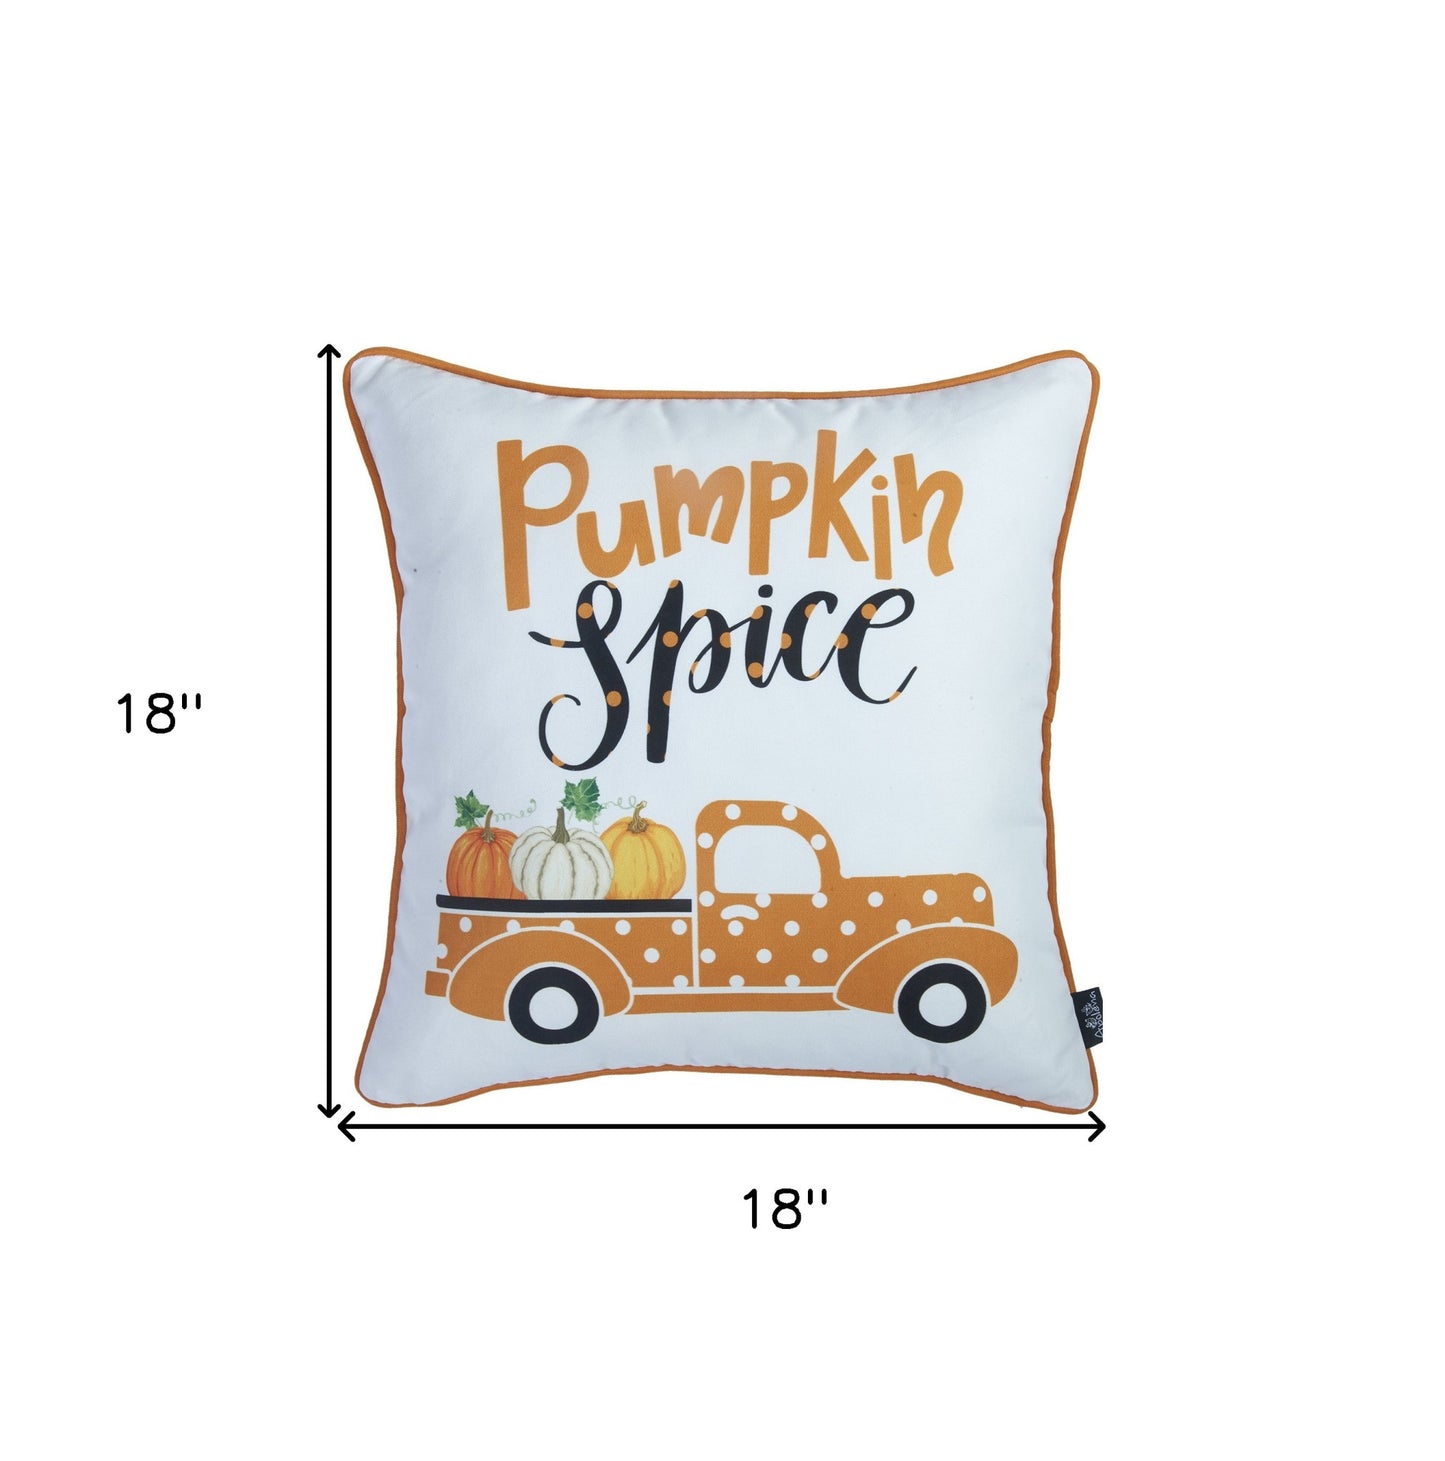 Set of Two 18" X 18" Orange and White Thanksgiving Pumpkin Pillow Covers